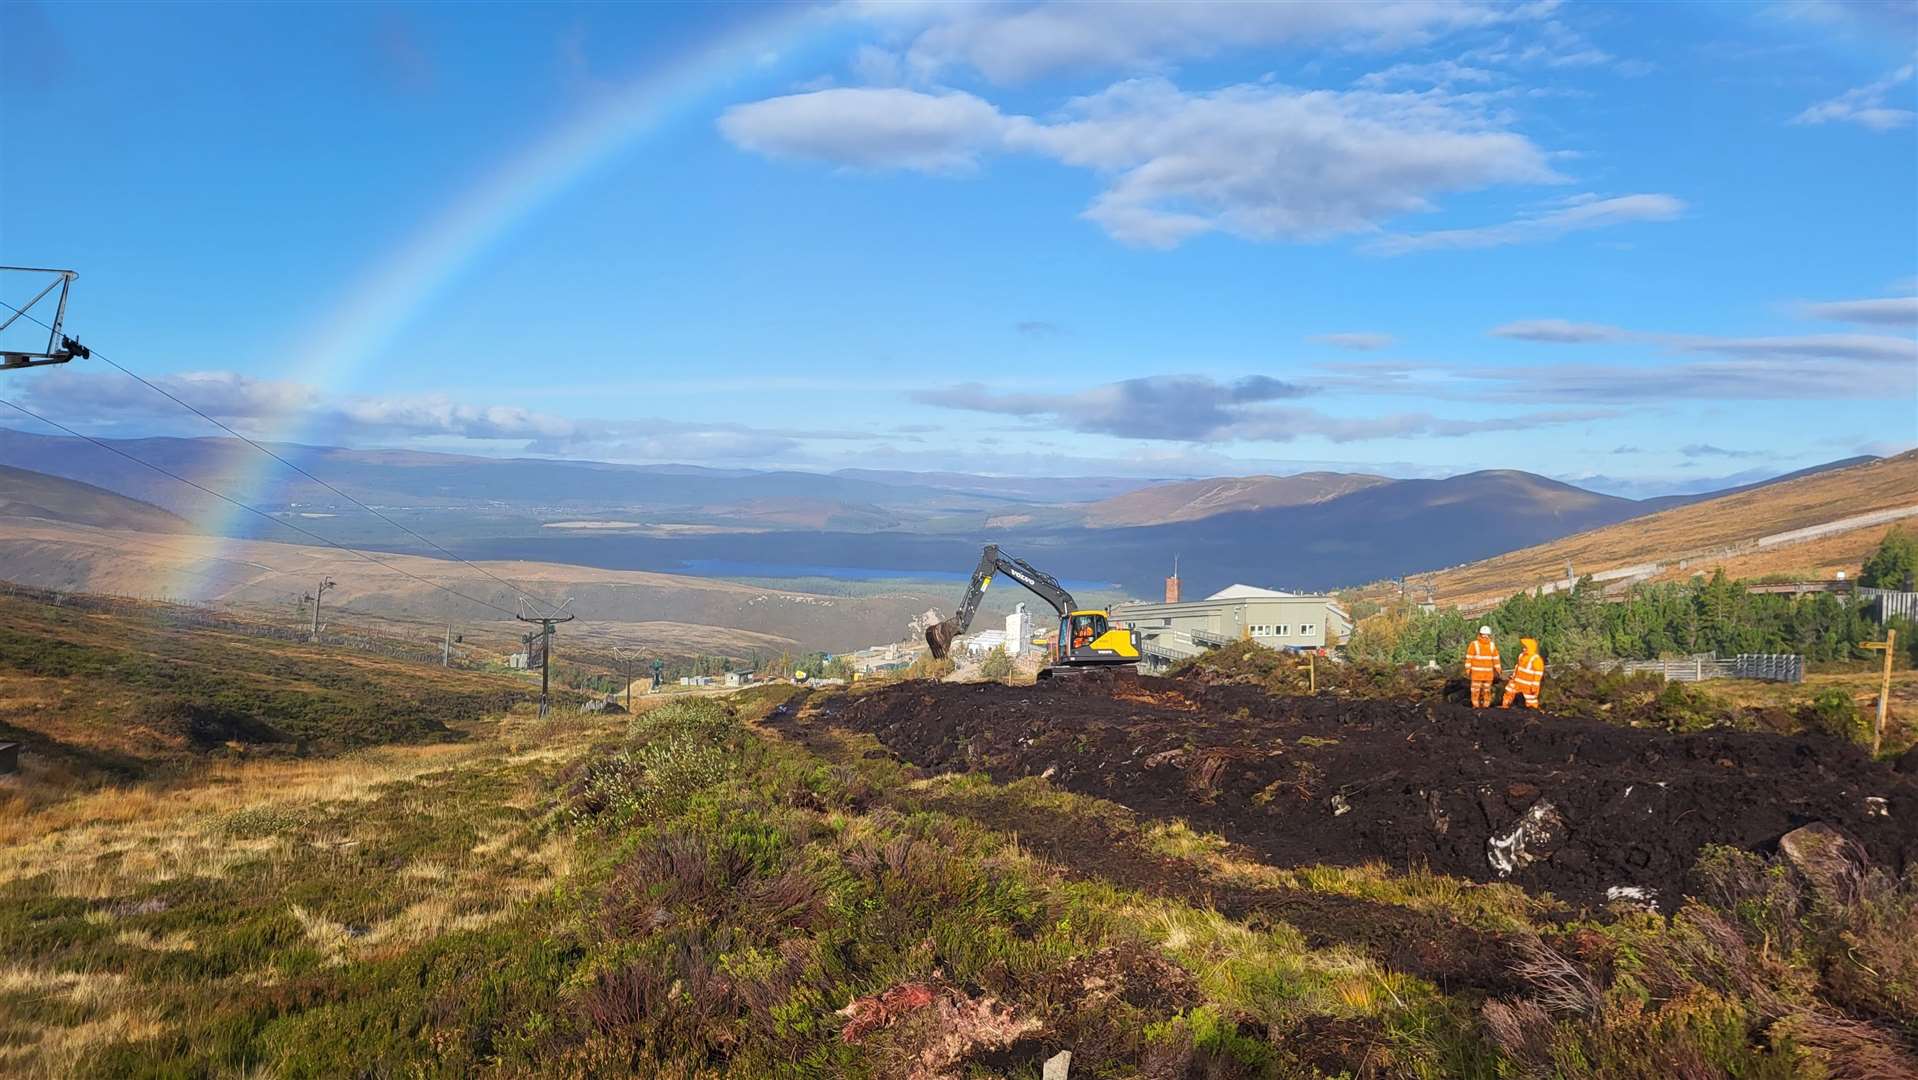 Work has started on installing new uplift at Cairngorm Mountain which will serve both snowsports and mountain biking.